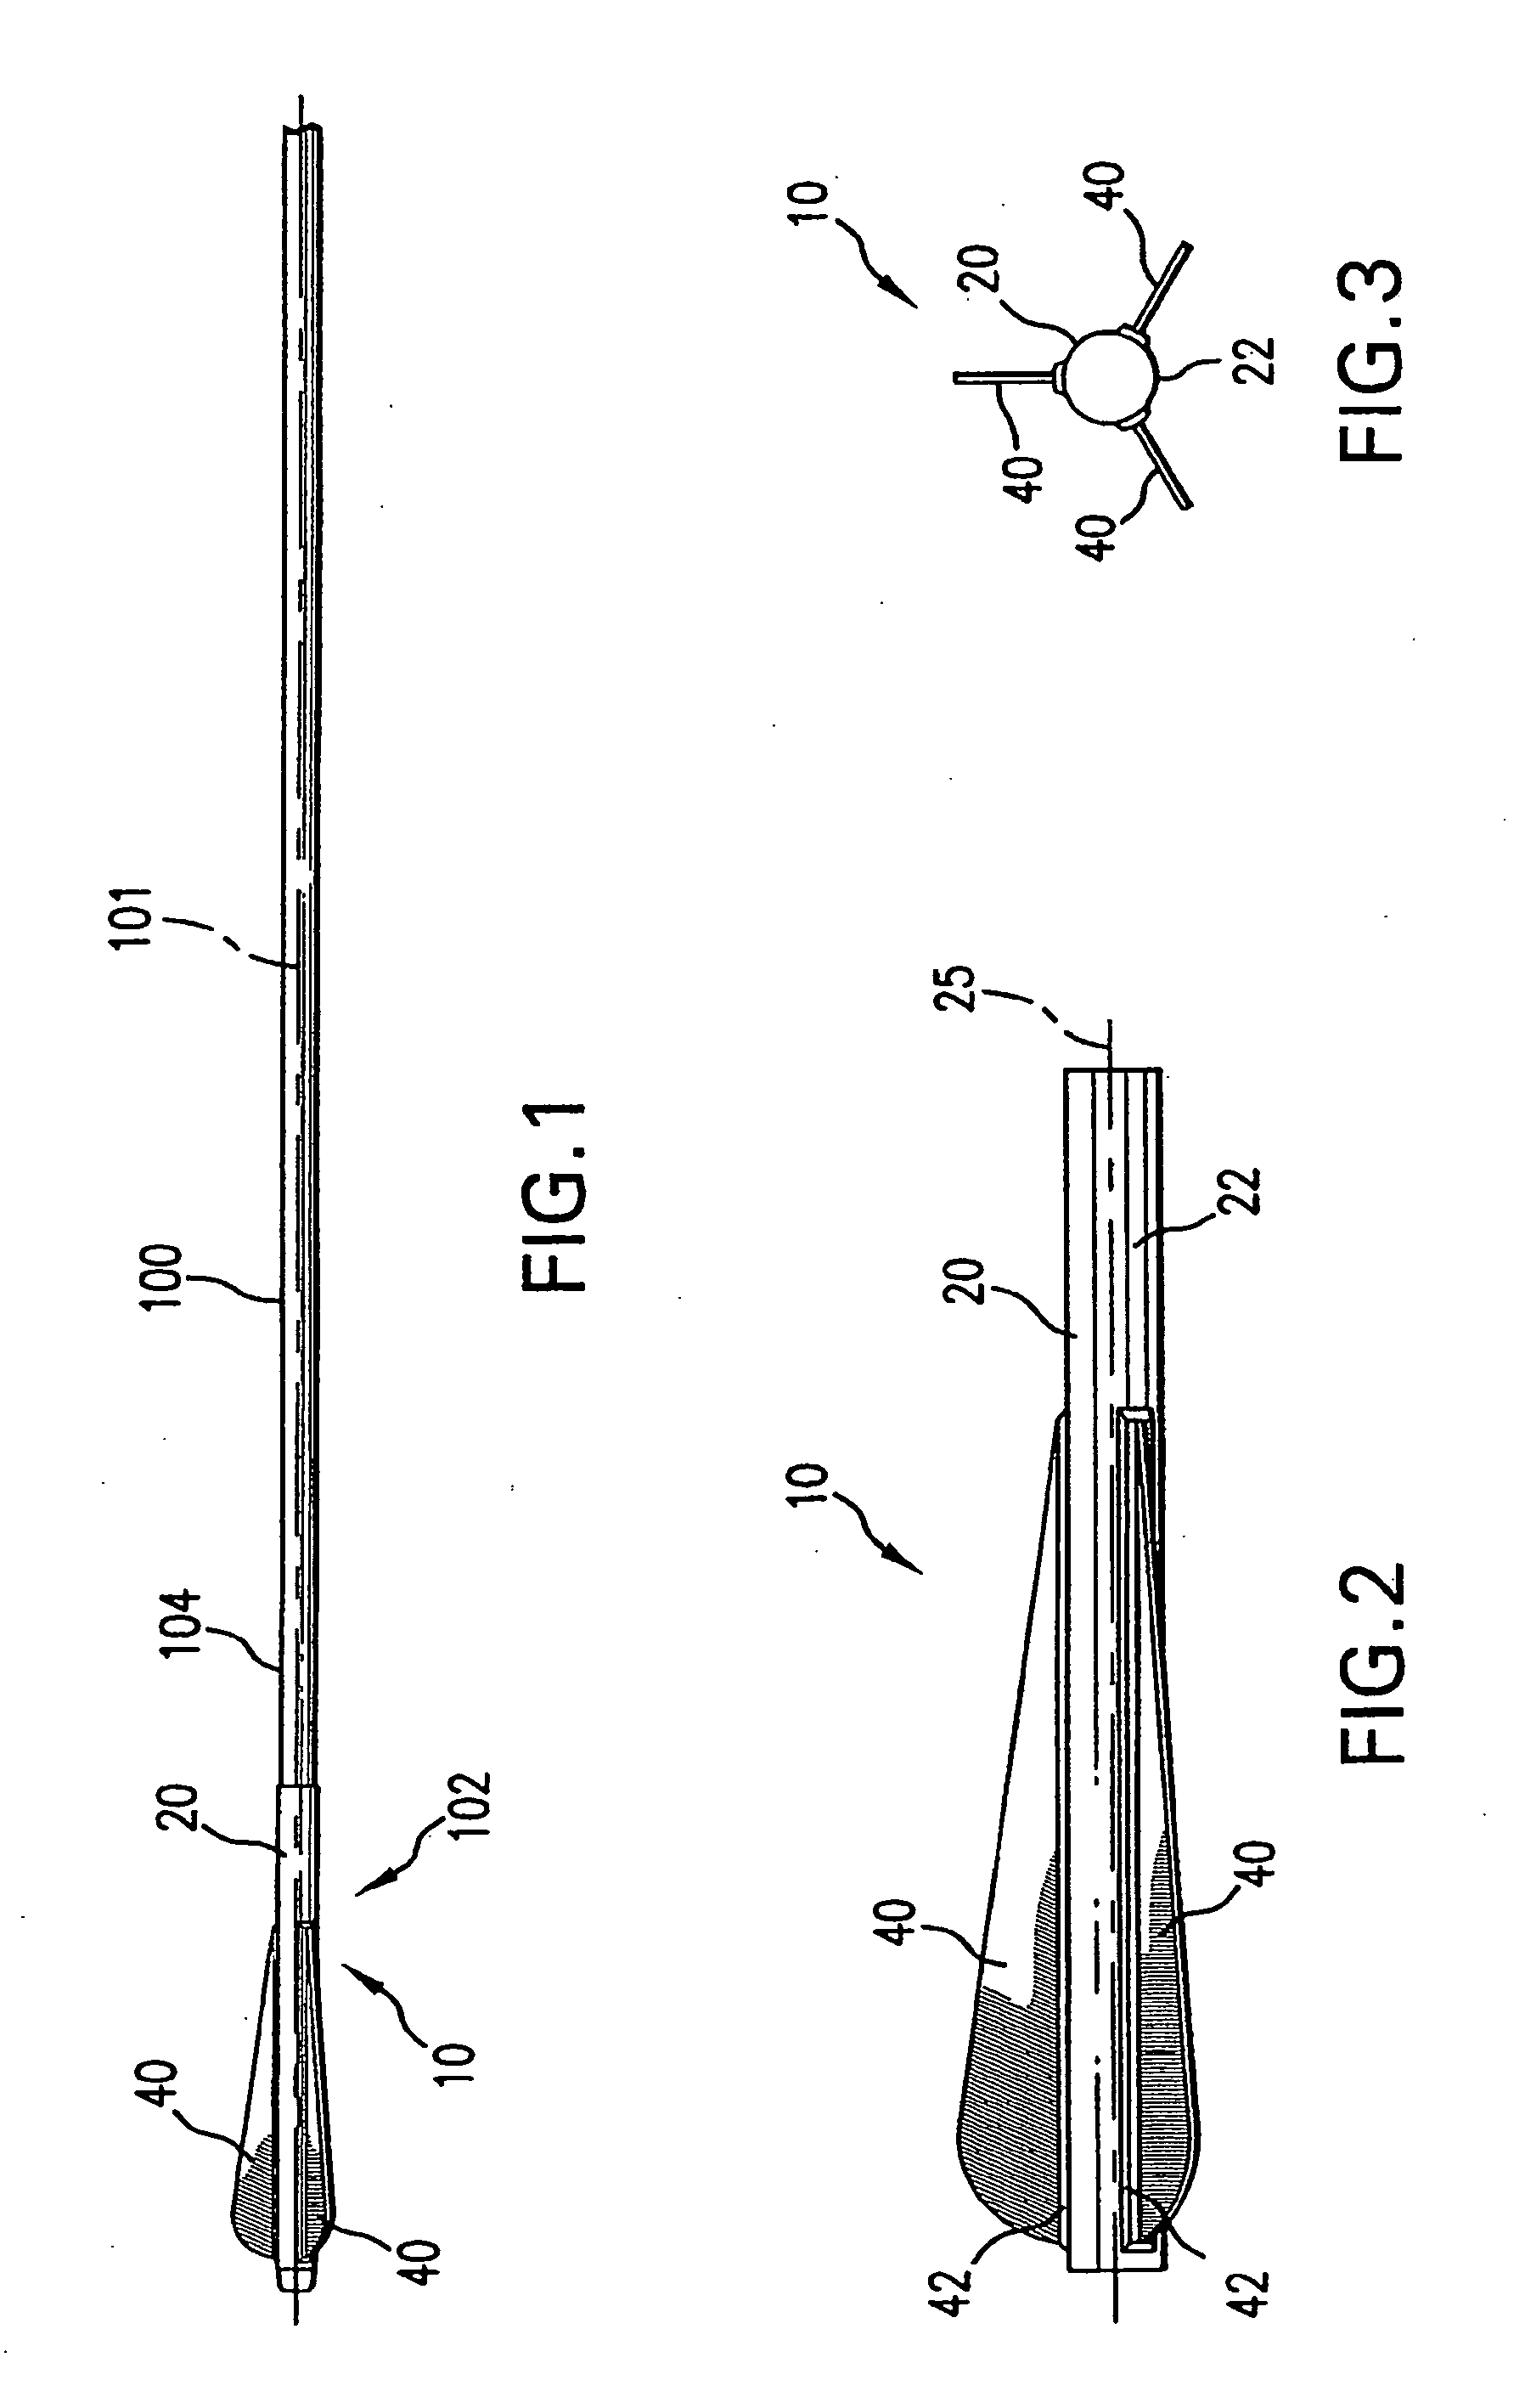 Apparatus and method for attaching vane to shaft